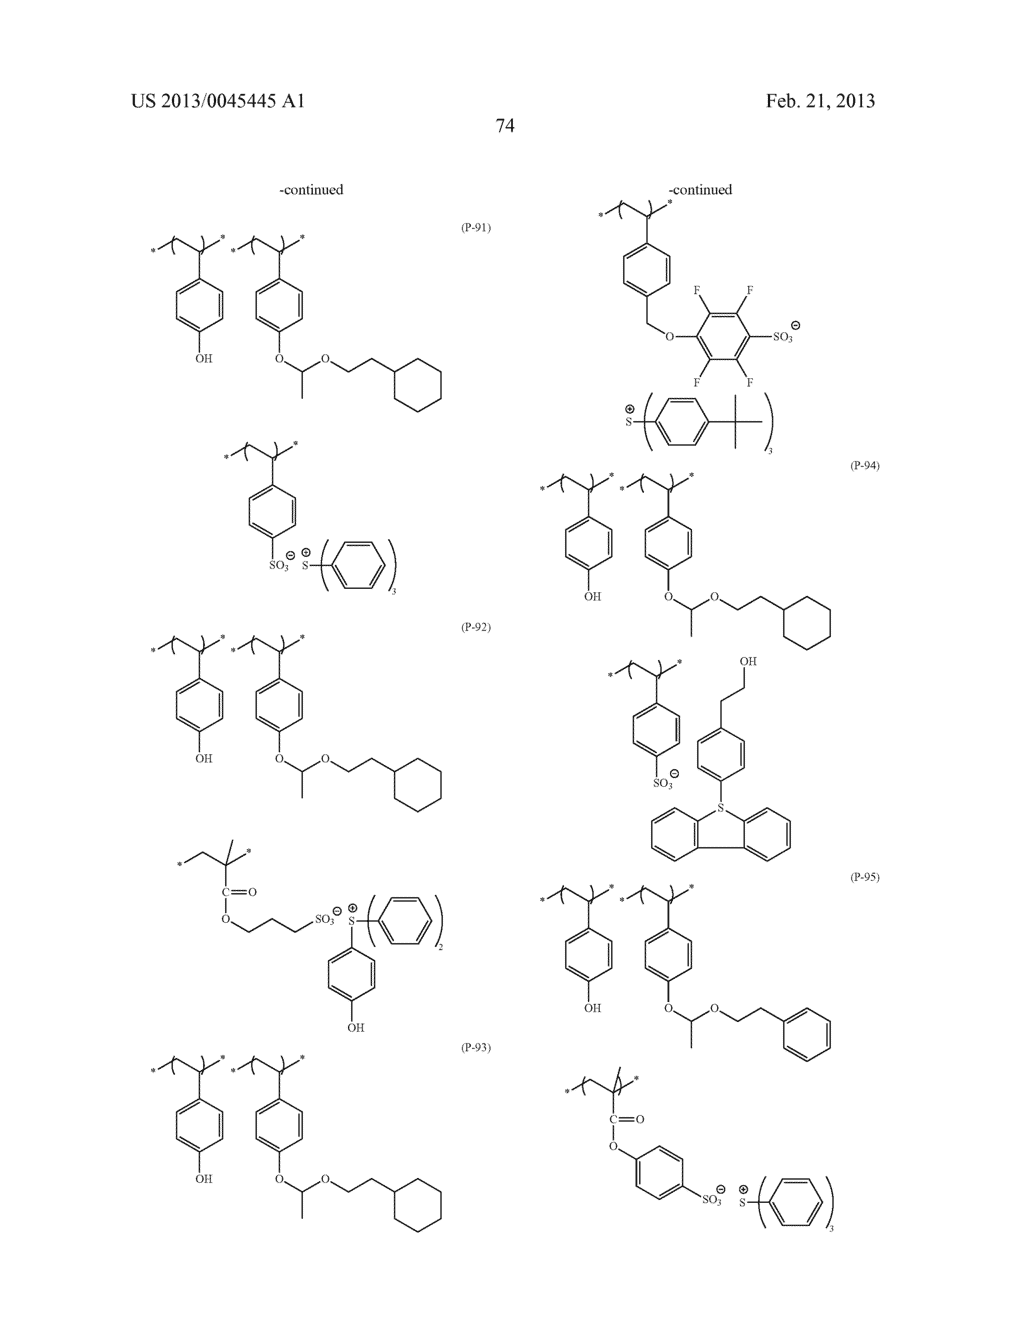 ACTINIC-RAY- OR RADIATION-SENSITIVE RESIN COMPOSITION, ACTINIC-RAY- OR     RADIATION-SENSITIVE RESIN FILM THEREFROM AND METHOD OF FORMING PATTERN     USING THE COMPOSITION - diagram, schematic, and image 75